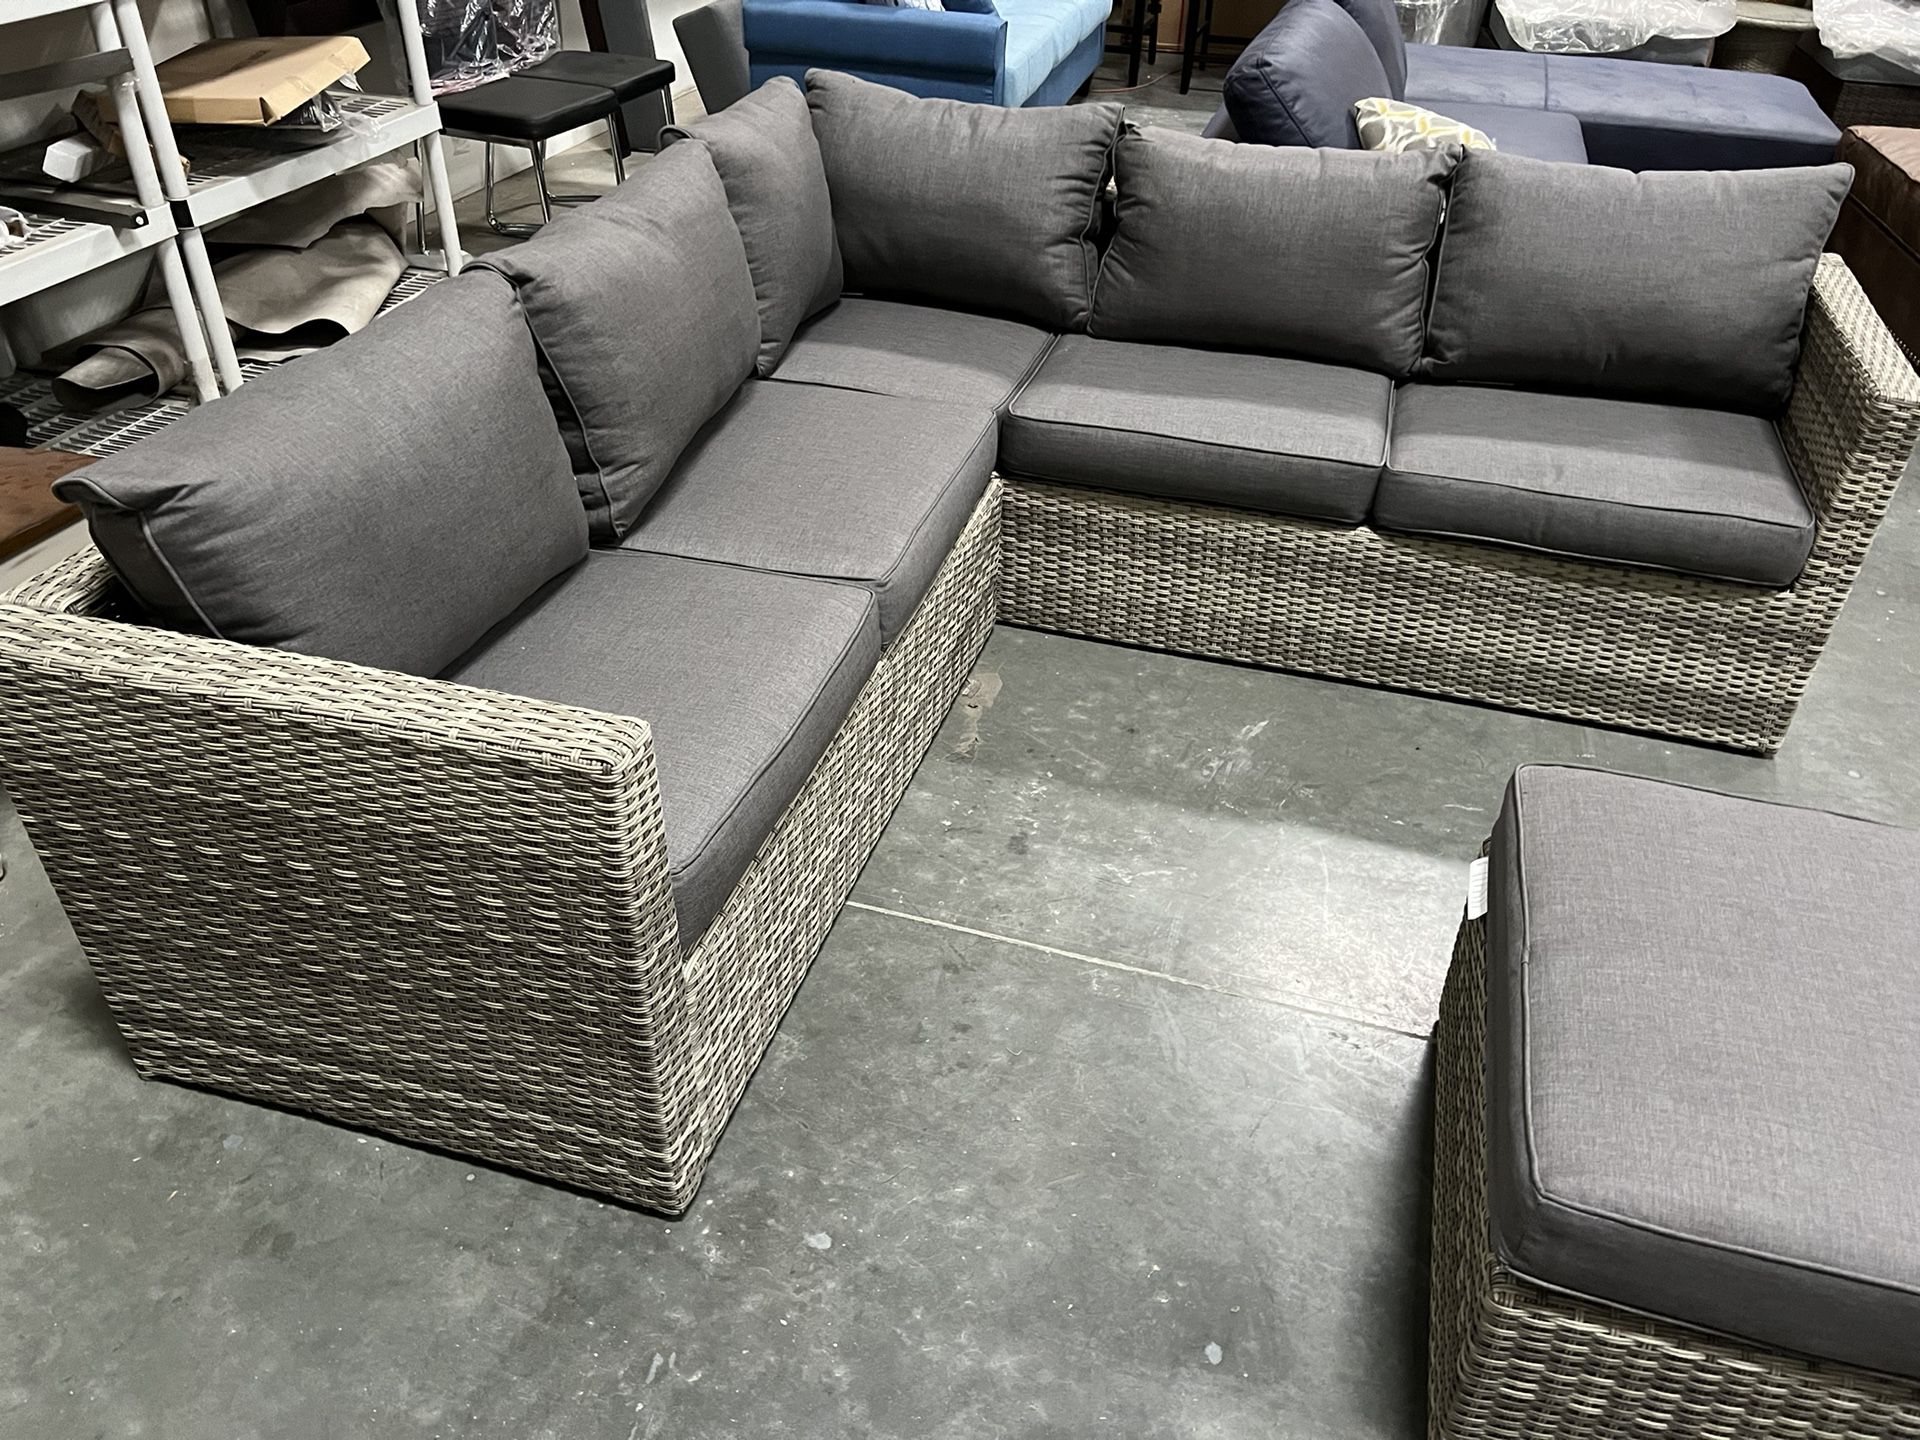 New! Patio Furniture, Patio Sectional, Sectionals, Sectional Sofa, Wicker Furniture, Outdoor Furniture, Patio Set